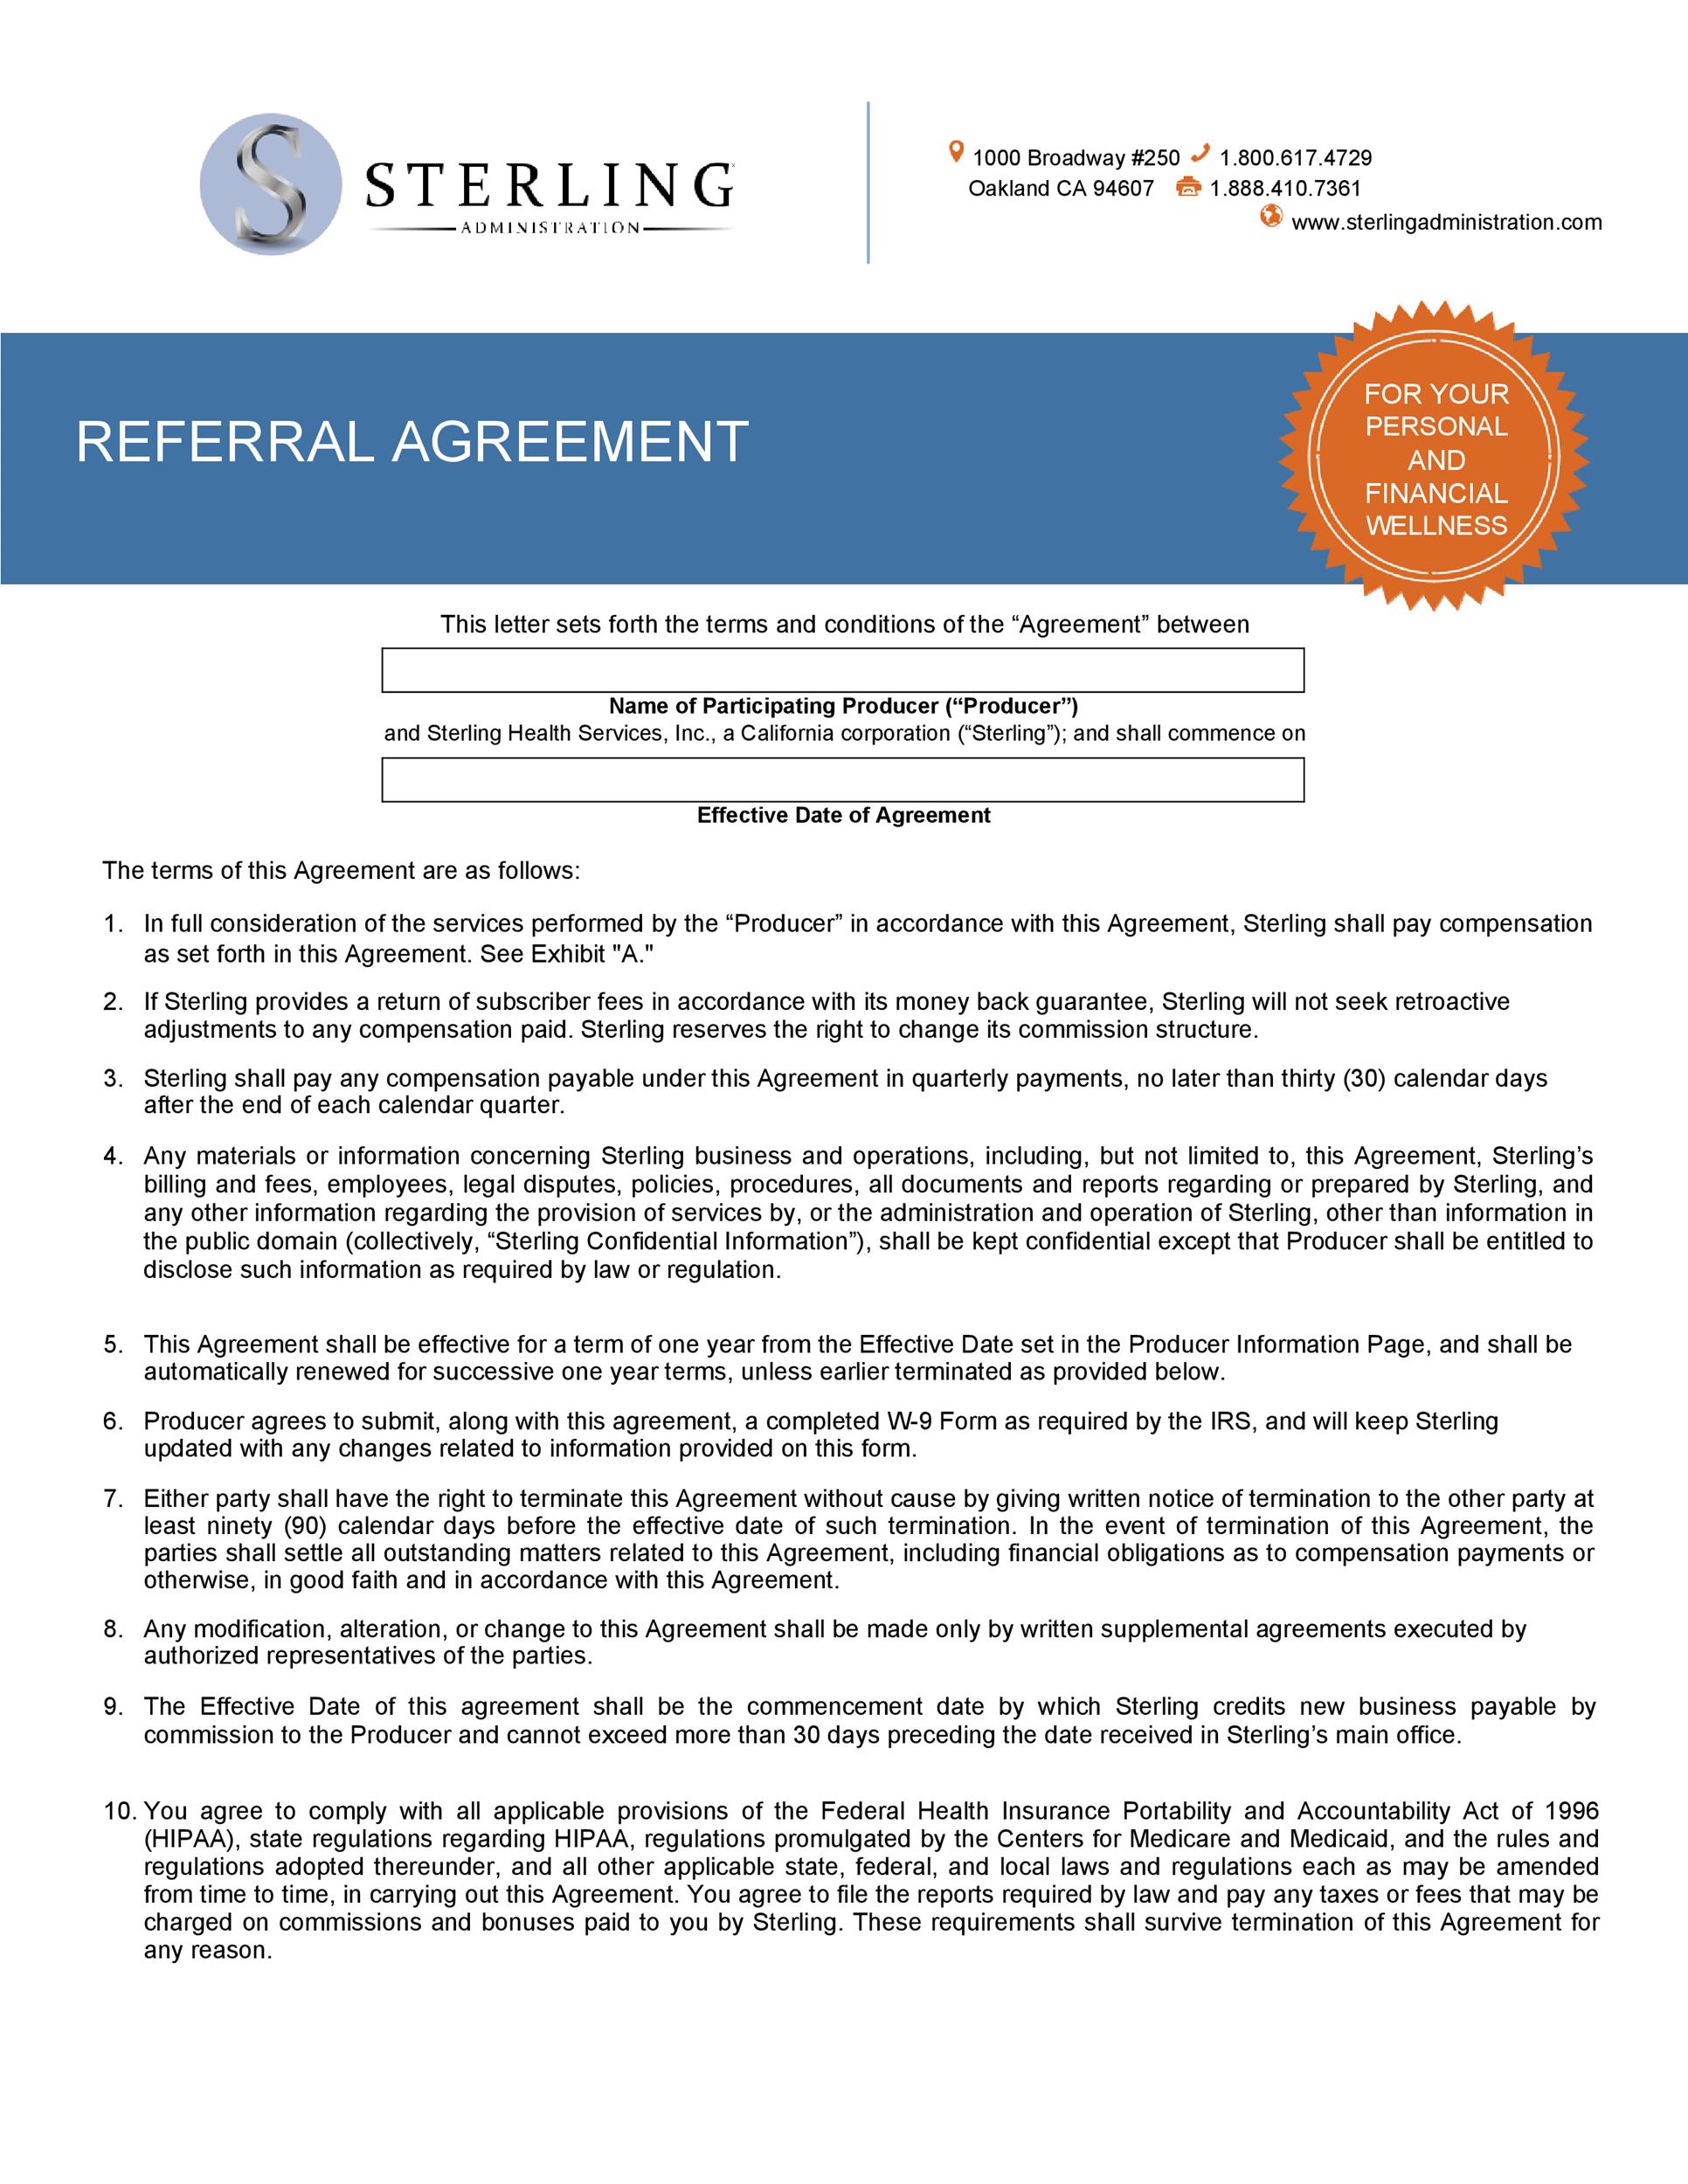 Free referral agreement template 25